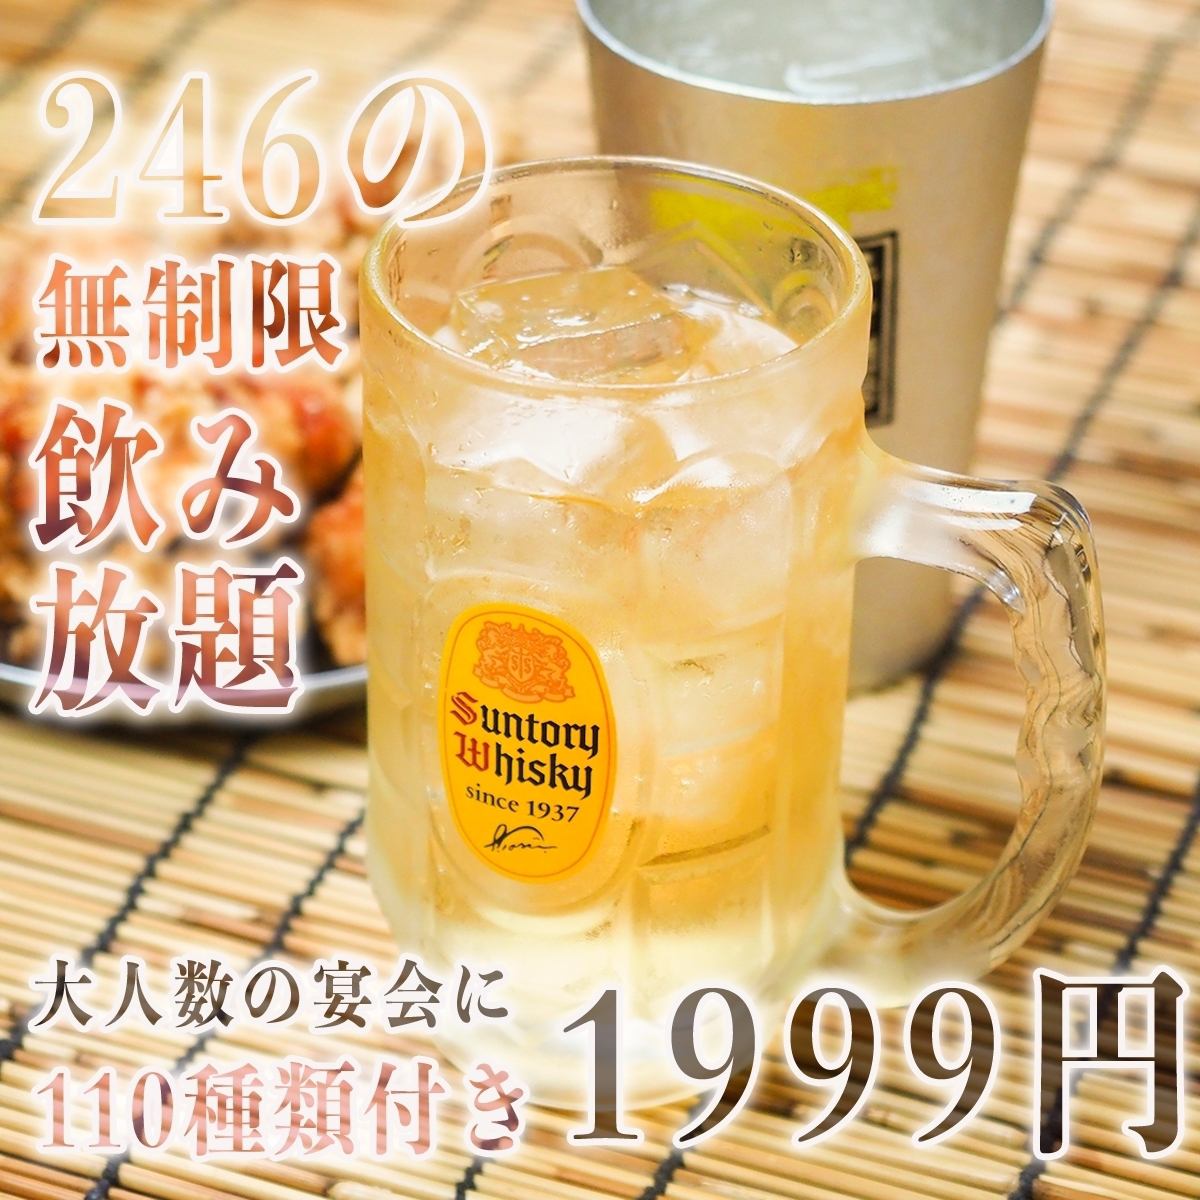 Students are welcome! 246 unlimited all-you-can-drinks held every day! 60 varieties for 1,999 yen